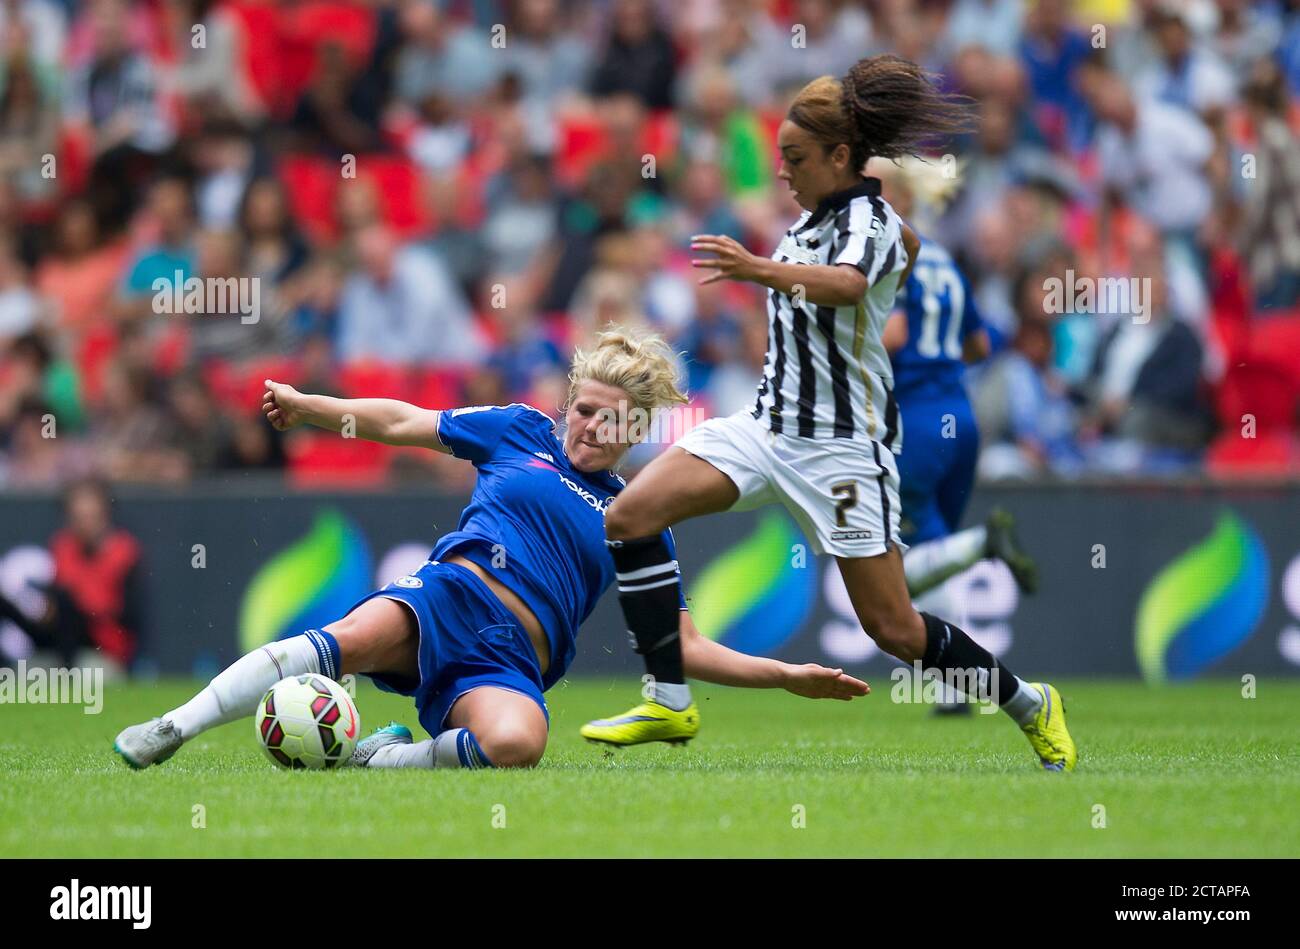 ELLIE BRIGHT TACKLES JESS CLARKE  Chelsea v Notts County Womens FA Cup Final - Wembley  PHOTO CREDIT : © MARK PAIN / ALAMY Stock Photo